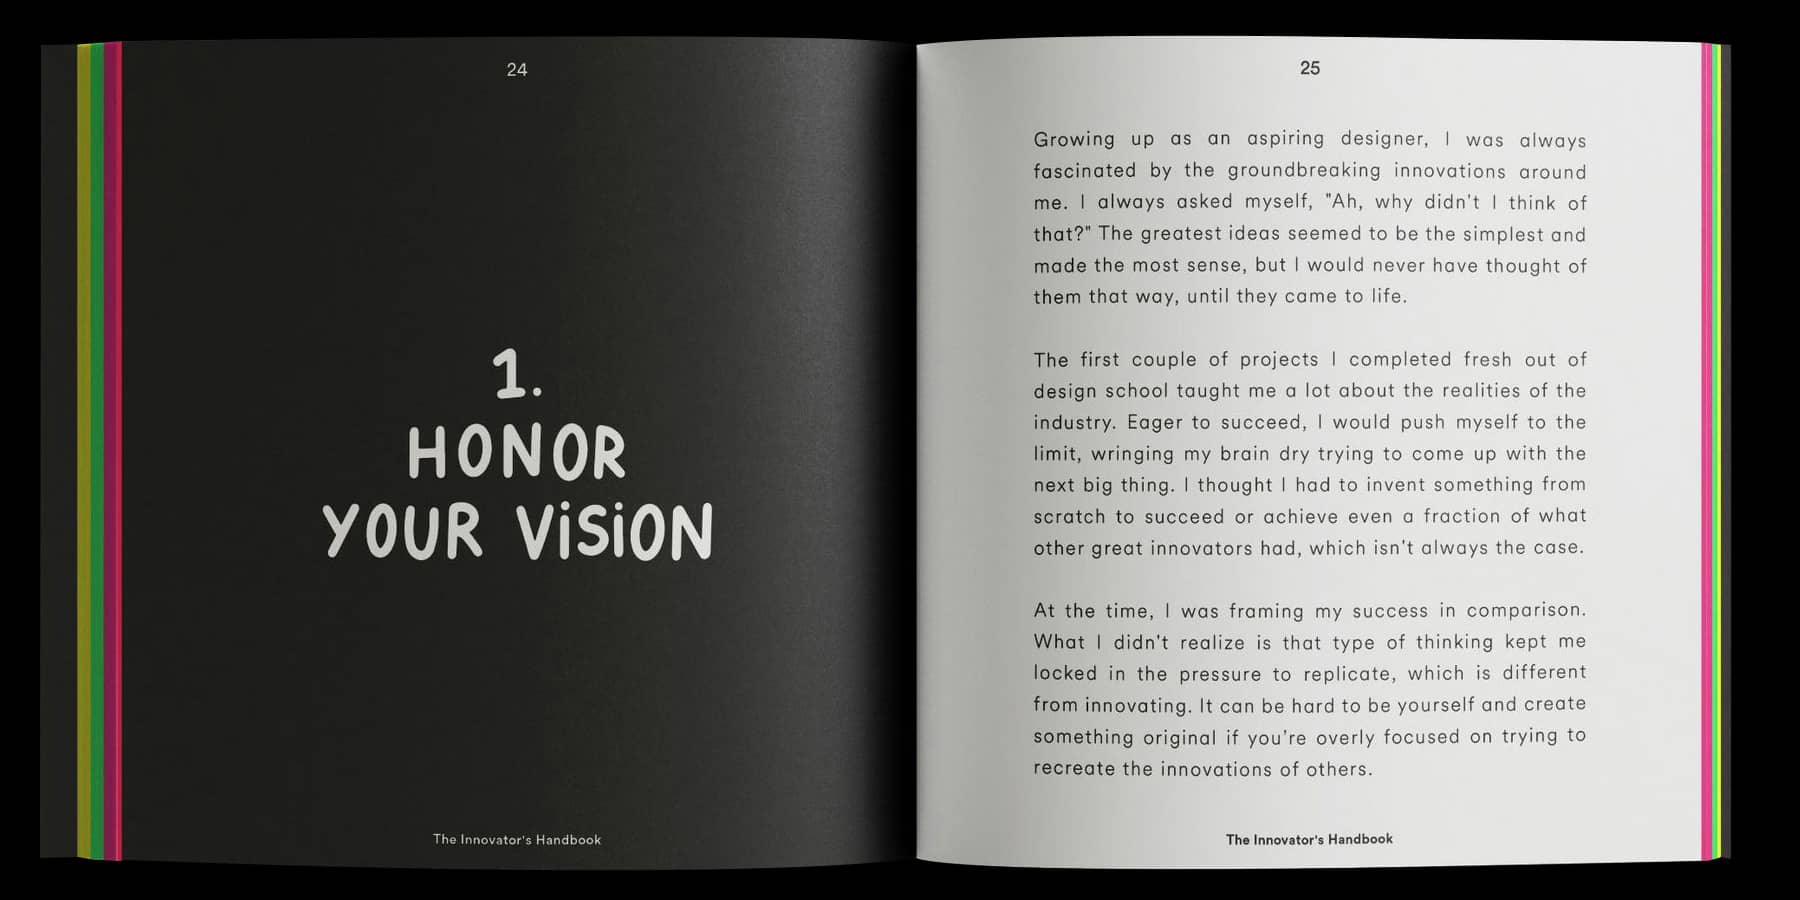 Example page with "Honor Your Vision" title